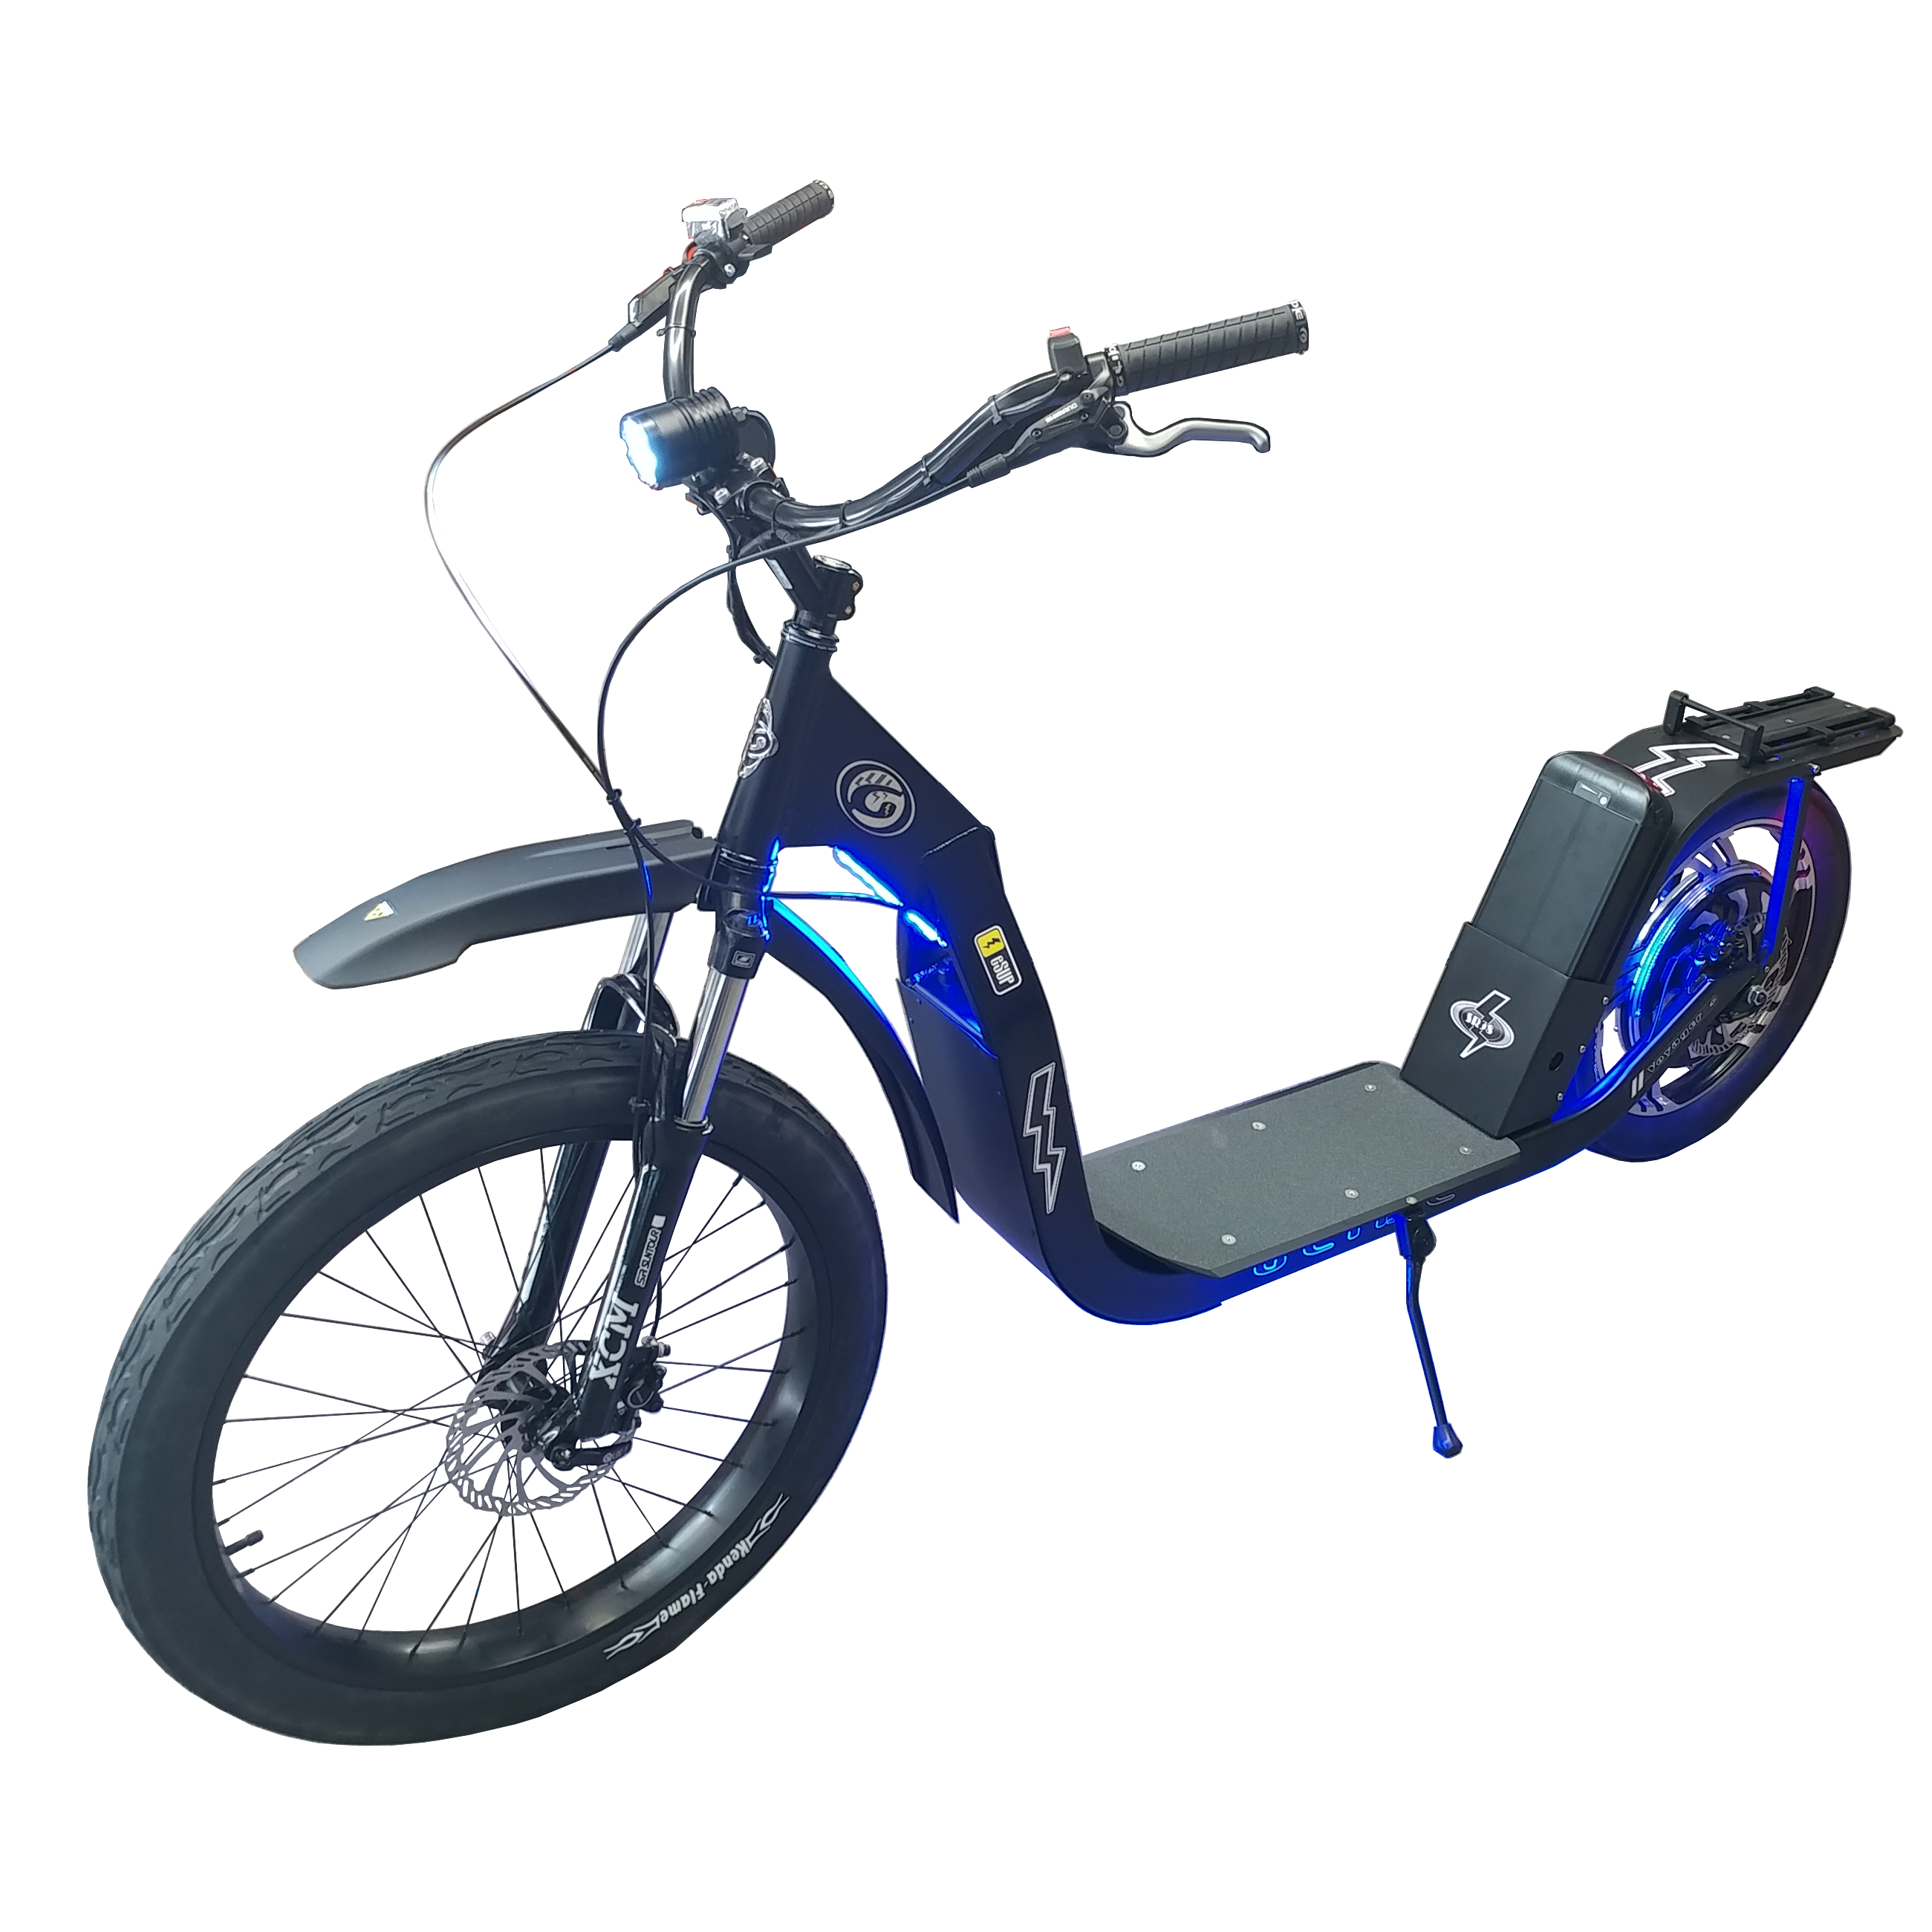 https://cdn.shopifycdn.net/s/files/1/0273/7691/0433/products/glide-cruisers-raptor-48v-1000-watt-fat-tire-electric-scooter-f1-15440466509921.png?v=1596080382